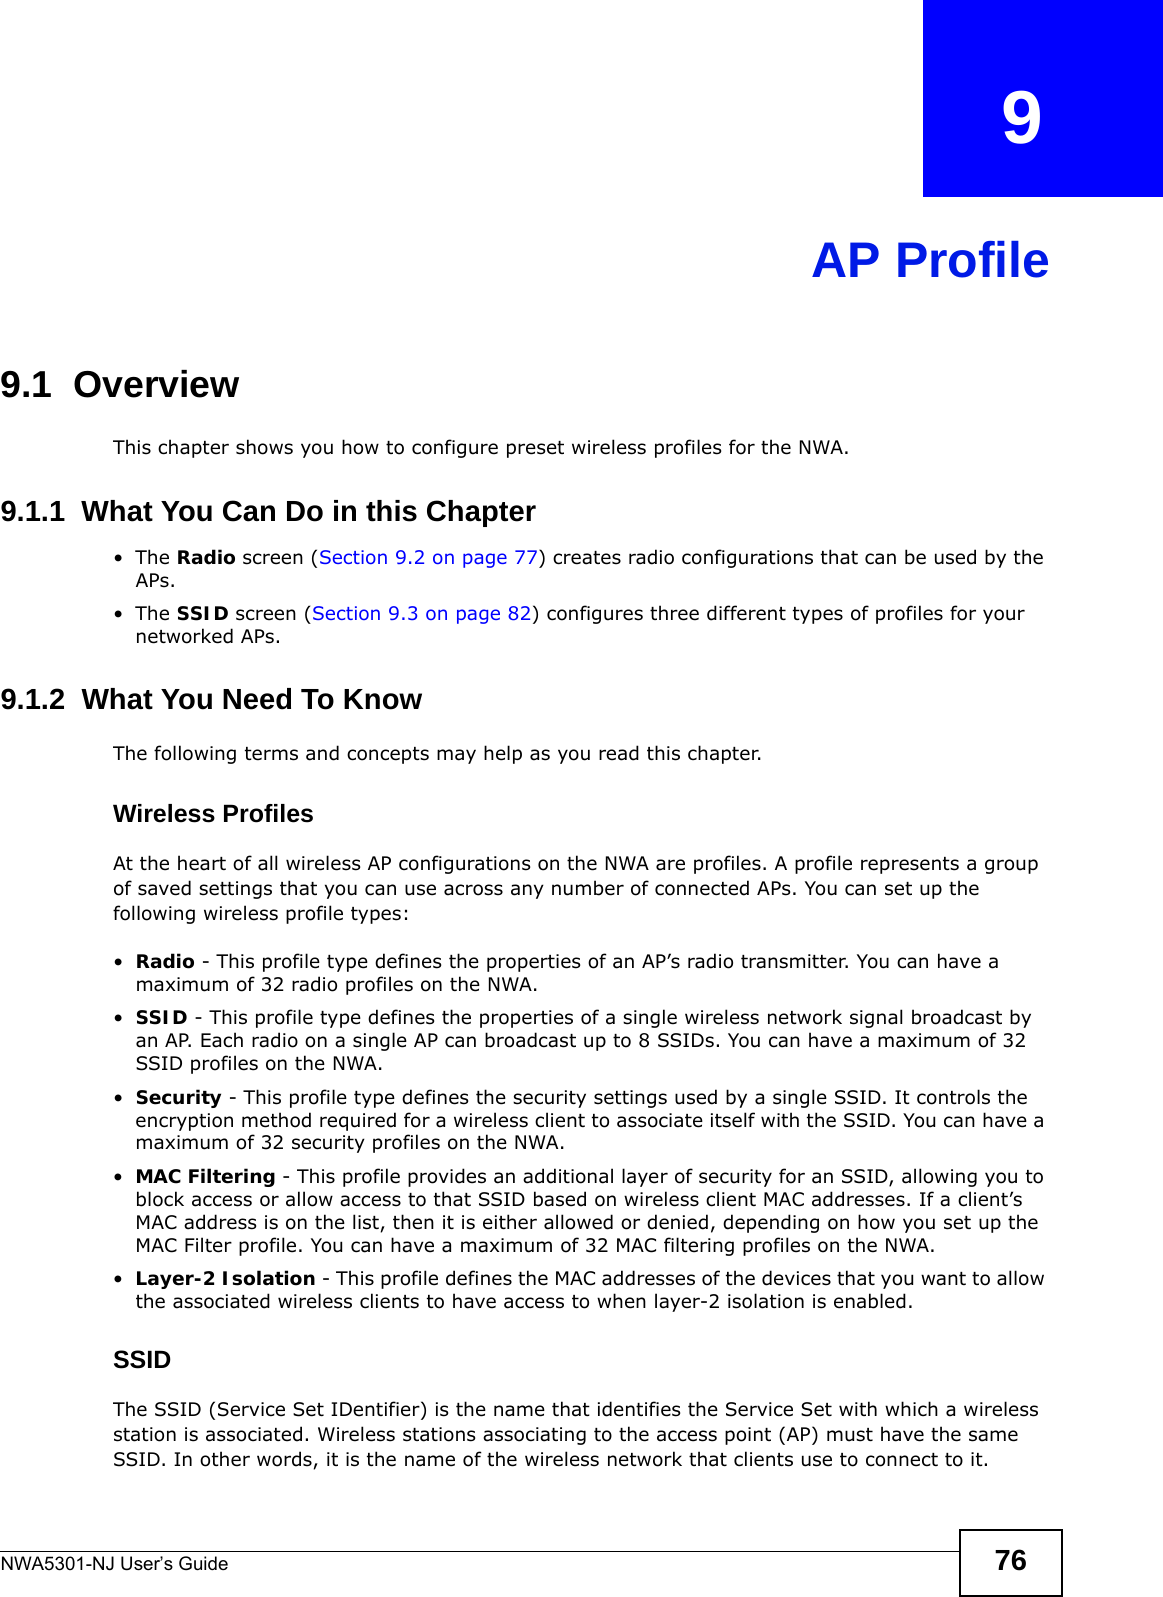 NWA5301-NJ User’s Guide 76CHAPTER   9AP Profile9.1  OverviewThis chapter shows you how to configure preset wireless profiles for the NWA. 9.1.1  What You Can Do in this Chapter•The Radio screen (Section 9.2 on page 77) creates radio configurations that can be used by the APs.•The SSID screen (Section 9.3 on page 82) configures three different types of profiles for your networked APs.9.1.2  What You Need To KnowThe following terms and concepts may help as you read this chapter.Wireless ProfilesAt the heart of all wireless AP configurations on the NWA are profiles. A profile represents a group of saved settings that you can use across any number of connected APs. You can set up the following wireless profile types:•Radio - This profile type defines the properties of an AP’s radio transmitter. You can have a maximum of 32 radio profiles on the NWA.•SSID - This profile type defines the properties of a single wireless network signal broadcast by an AP. Each radio on a single AP can broadcast up to 8 SSIDs. You can have a maximum of 32 SSID profiles on the NWA.•Security - This profile type defines the security settings used by a single SSID. It controls the encryption method required for a wireless client to associate itself with the SSID. You can have a maximum of 32 security profiles on the NWA.•MAC Filtering - This profile provides an additional layer of security for an SSID, allowing you to block access or allow access to that SSID based on wireless client MAC addresses. If a client’s MAC address is on the list, then it is either allowed or denied, depending on how you set up the MAC Filter profile. You can have a maximum of 32 MAC filtering profiles on the NWA.•Layer-2 Isolation - This profile defines the MAC addresses of the devices that you want to allow the associated wireless clients to have access to when layer-2 isolation is enabled. SSIDThe SSID (Service Set IDentifier) is the name that identifies the Service Set with which a wireless station is associated. Wireless stations associating to the access point (AP) must have the same SSID. In other words, it is the name of the wireless network that clients use to connect to it.